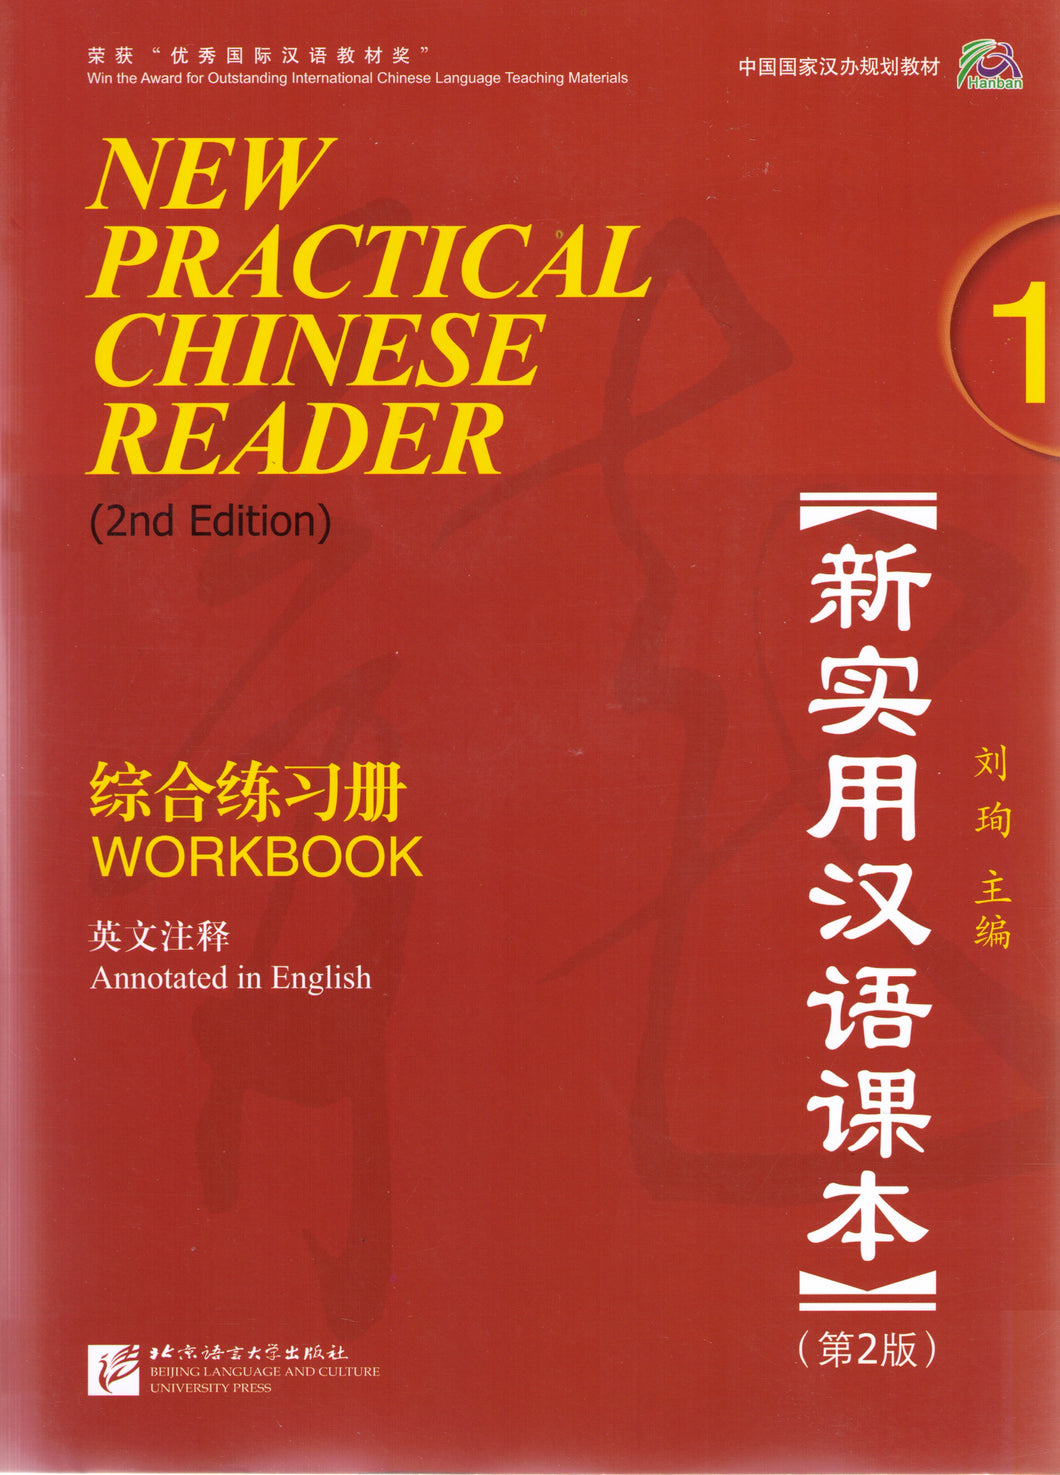 New Pactical Chinese Reader 2nd Edition-Volume 1-Textbook 新实用汉语课本 第2版